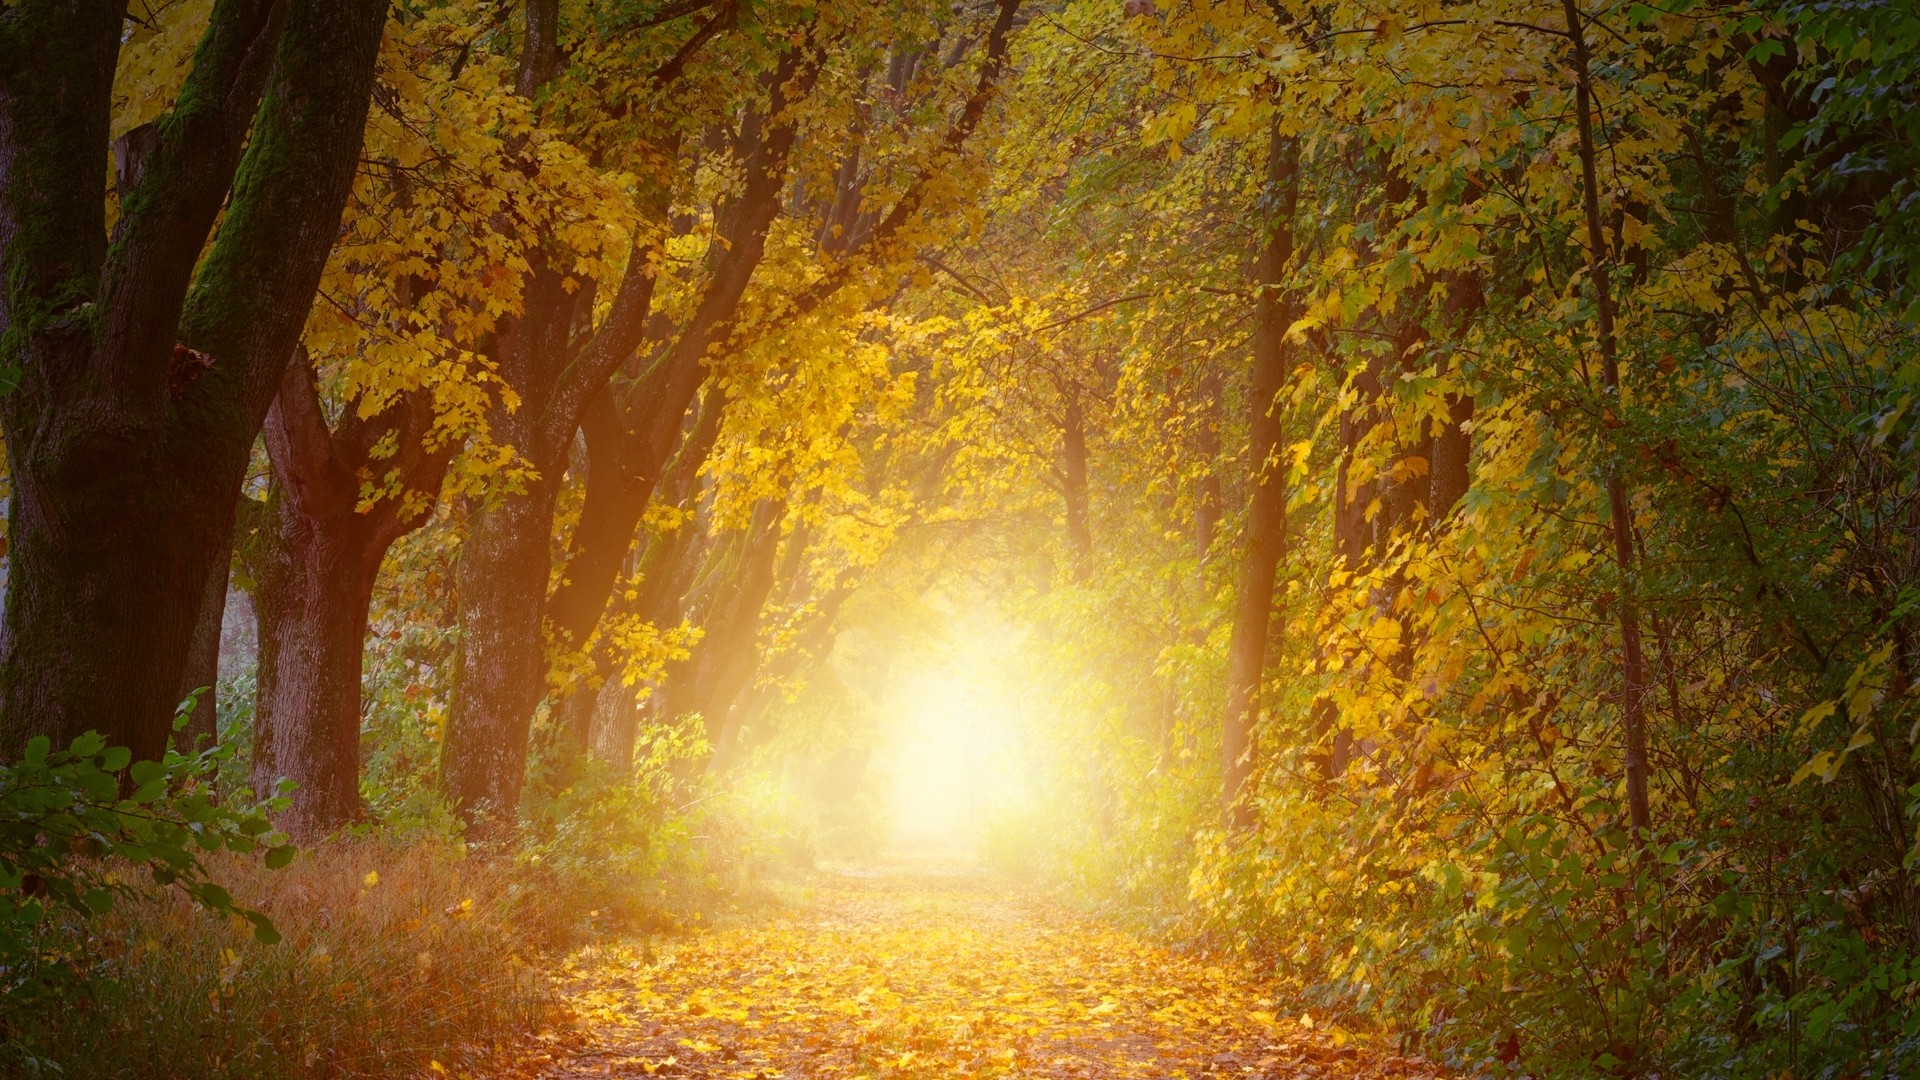 1920x1080 wallpapers: autumn, trees, arch, sunlight (image)